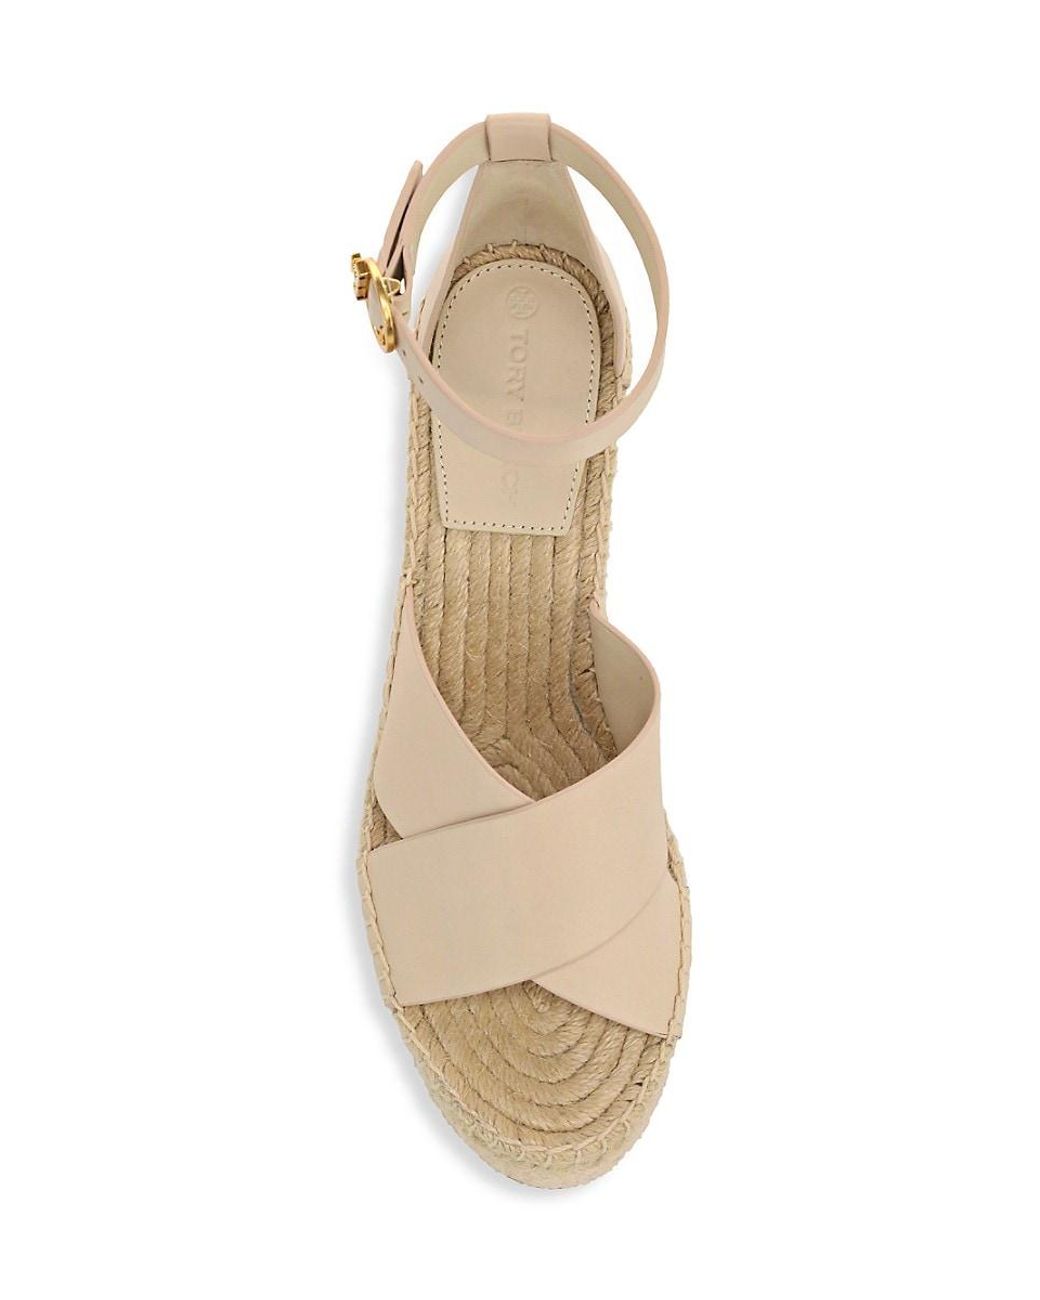 Tory Burch Selby Leather Platform Espadrille Wedges in Natural | Lyst